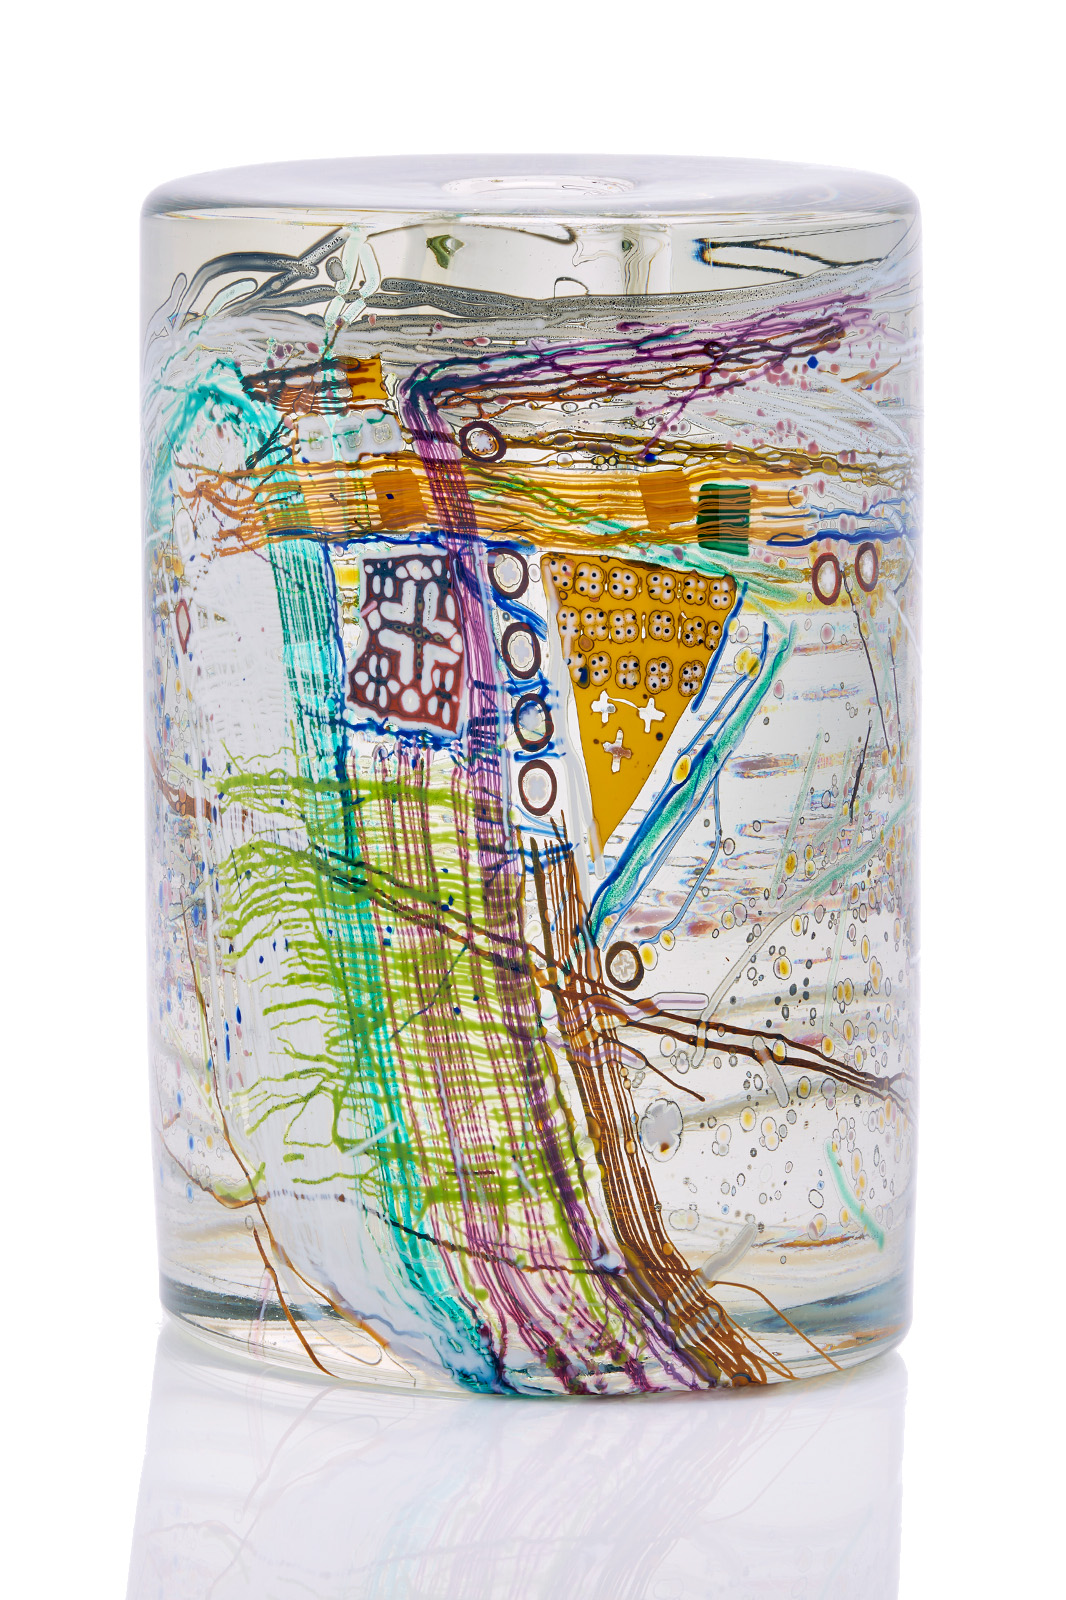 Dale Chihuly, Cross and Stitched Yellow Shard Blanket Cylinder #43, 2019 